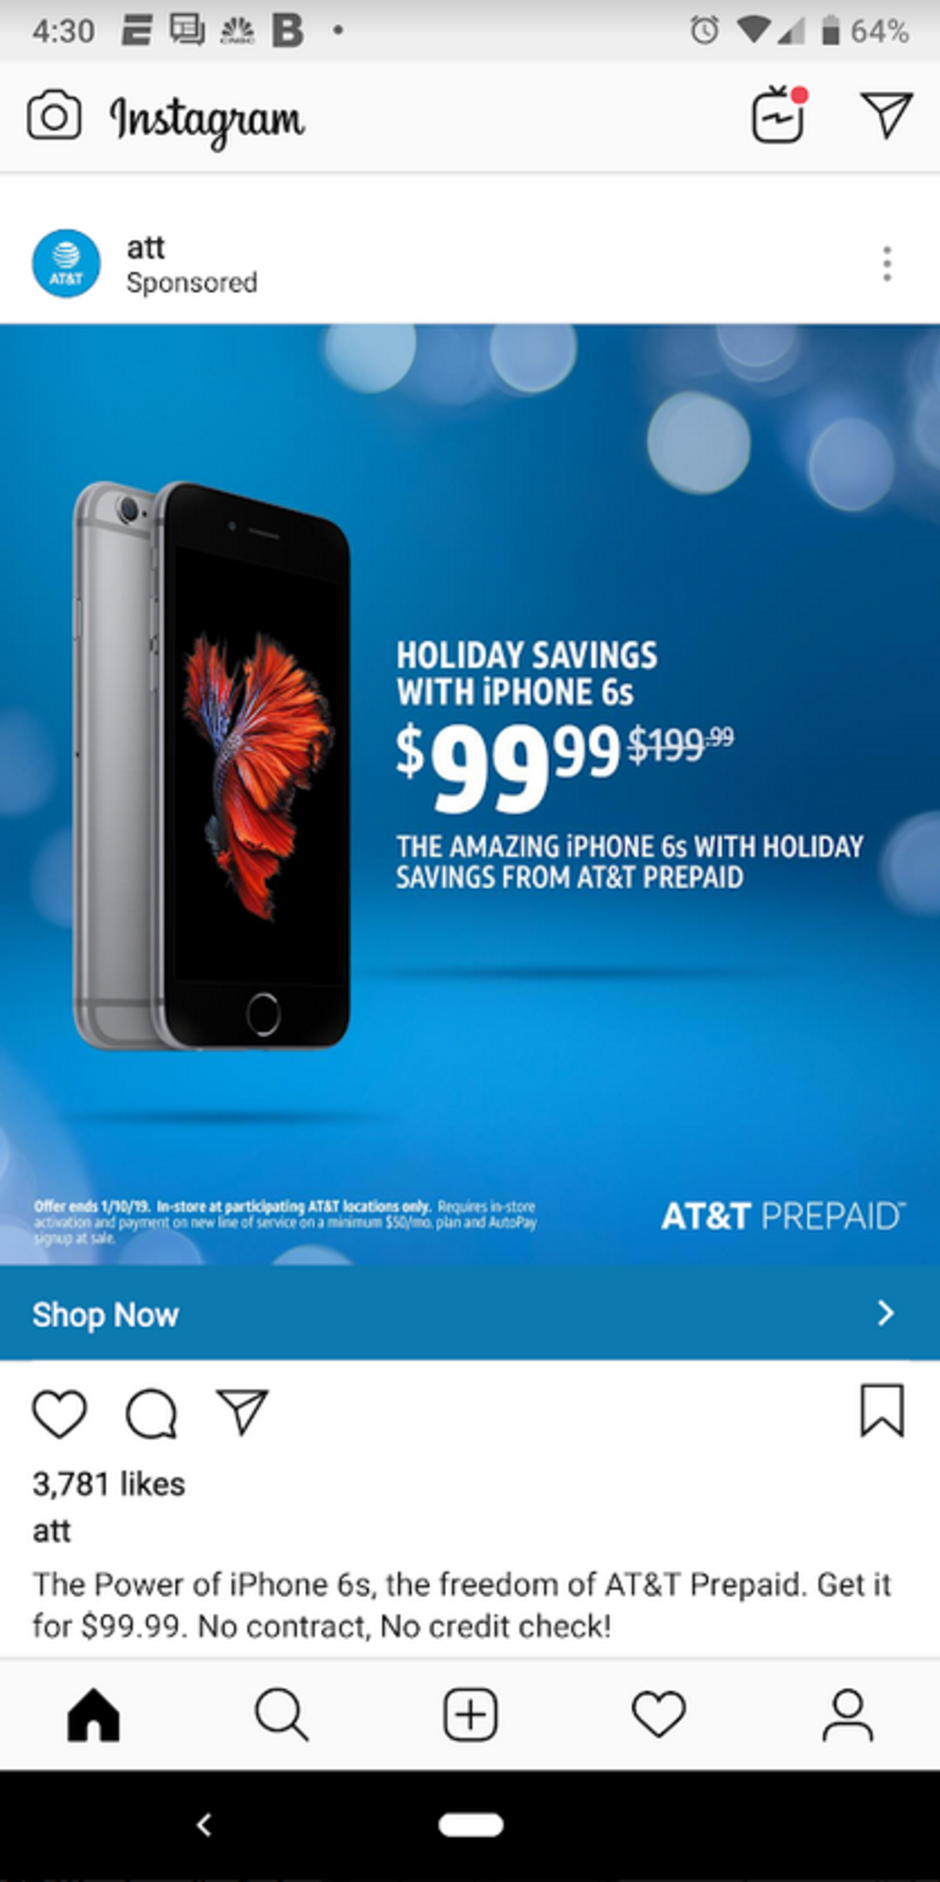 The Apple iPhone 6s is half off at $99.99 from AT&amp;T Prepaid - AT&T has the Apple iPhone 6s for $99.99 ($100 off) for prepaid customers; conditions apply